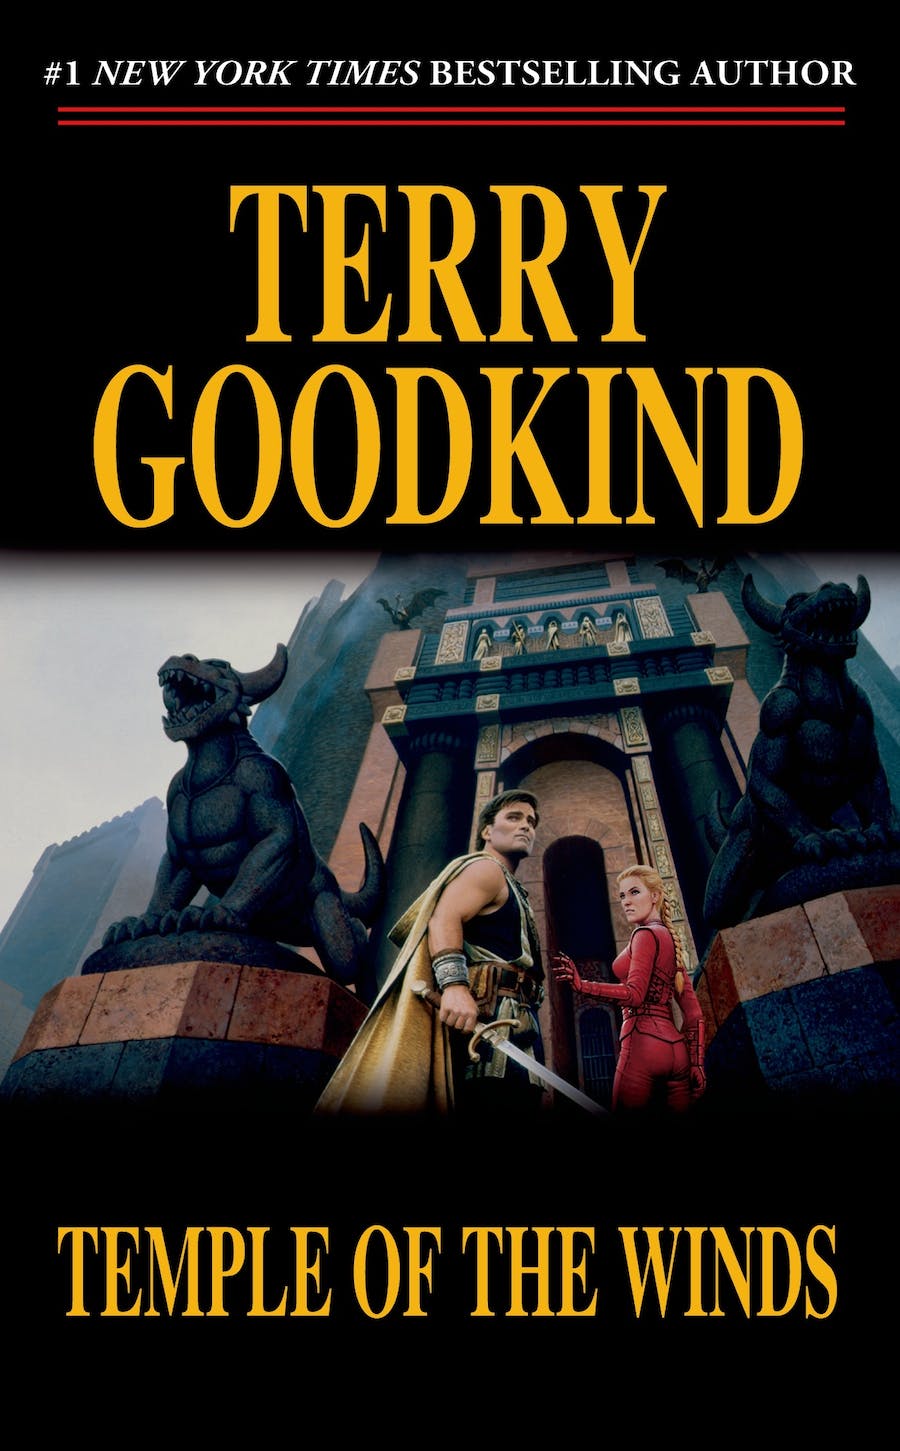 Terry Goodkind: Temple of the Winds (1998, Millennium)